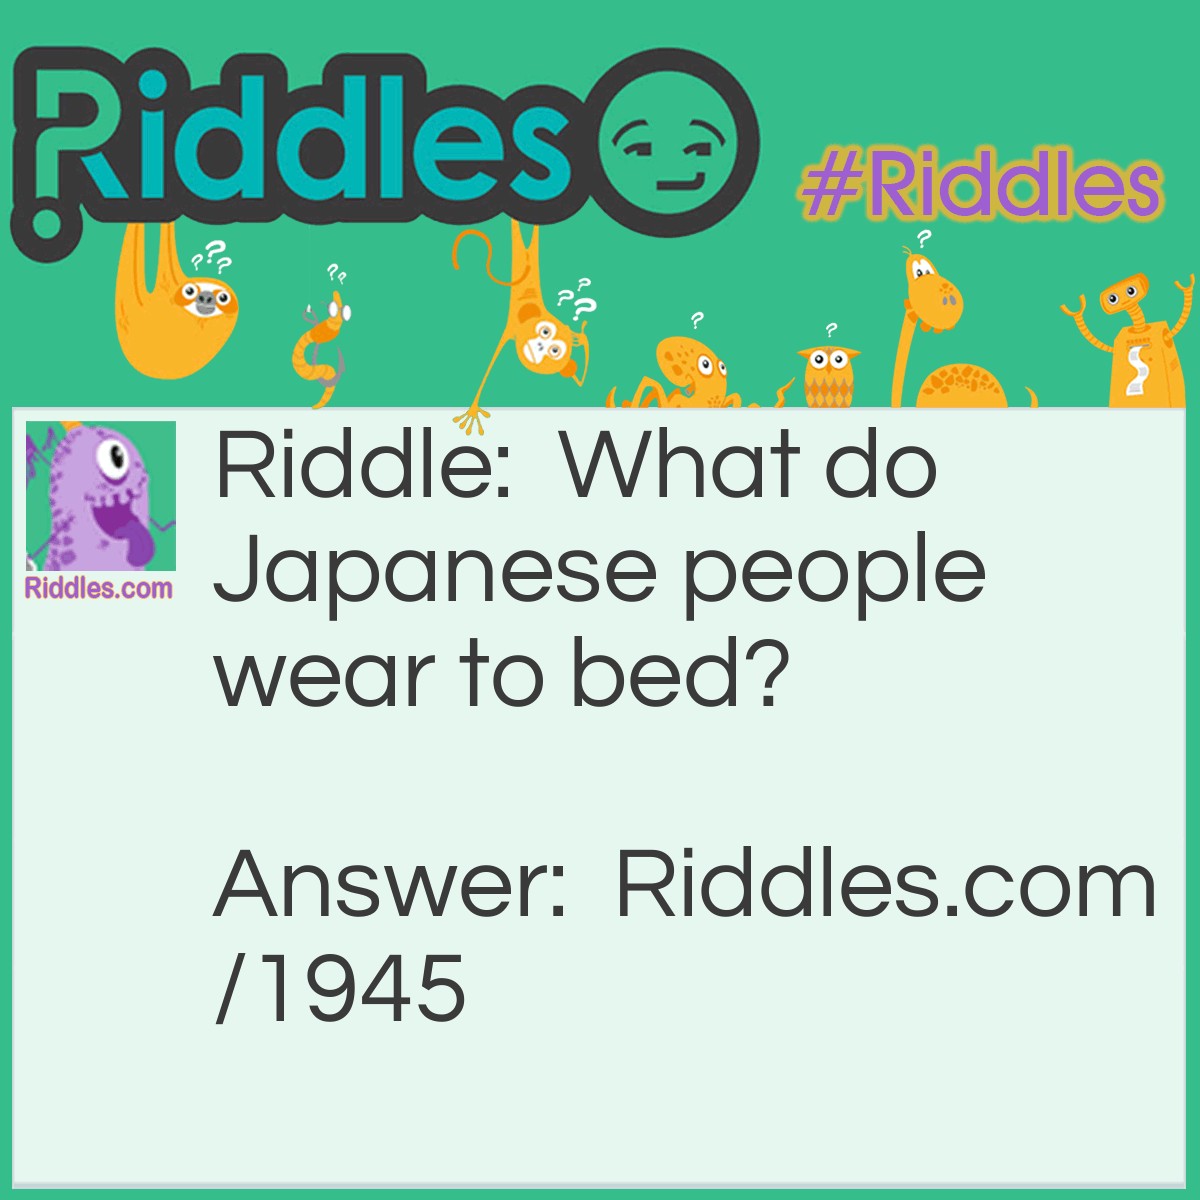 Riddle: What do Japanese people wear to bed? Answer: Tea-shirts.